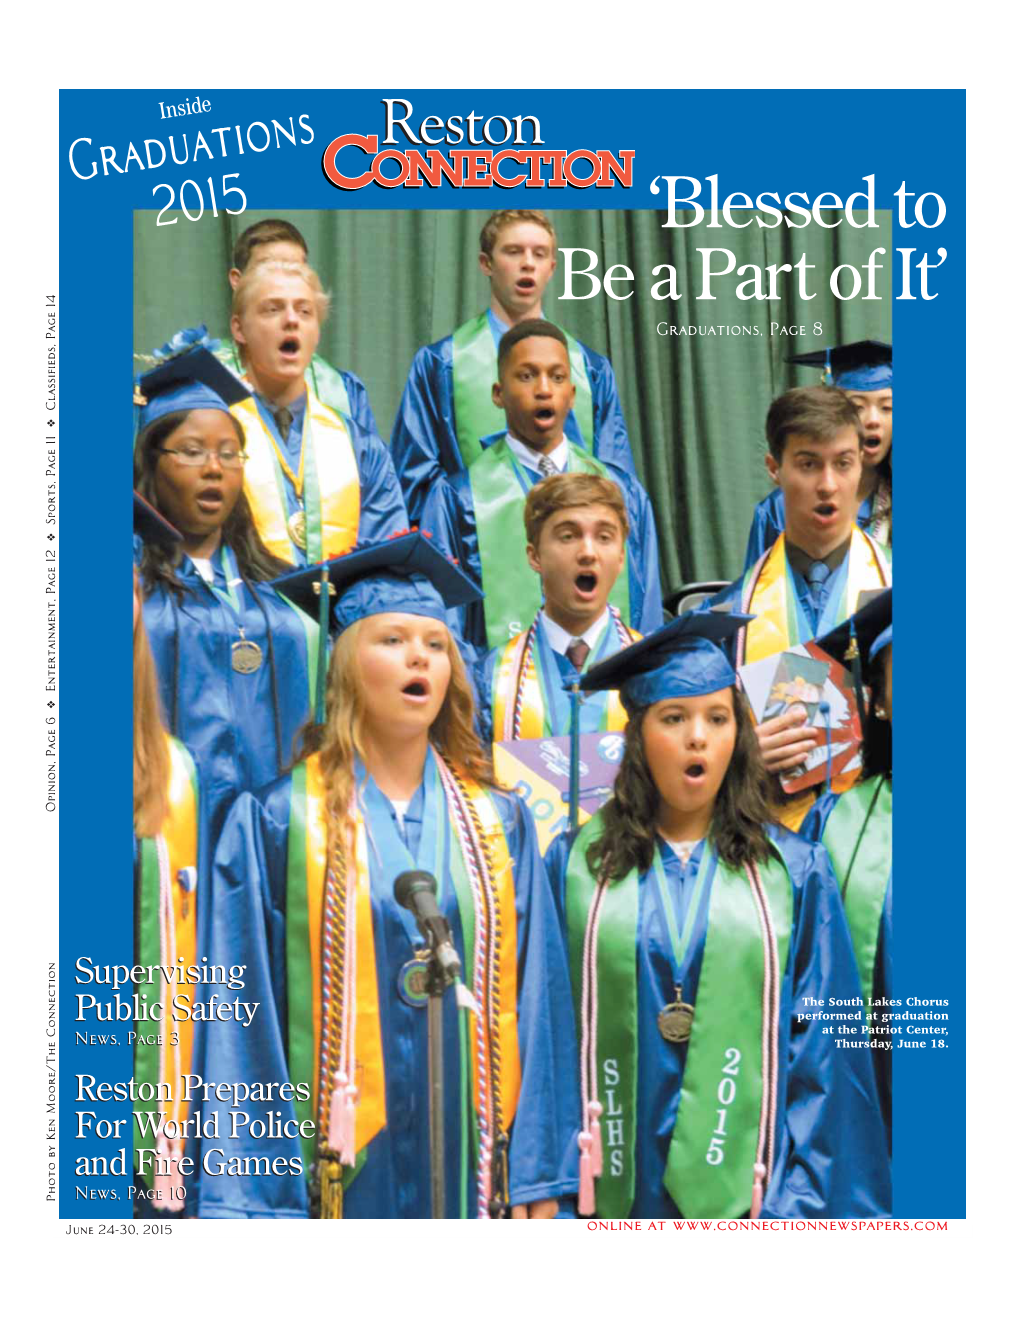 Restonreston 2015 ‘Blessed to Be a Part of It’ Graduations, Page 8